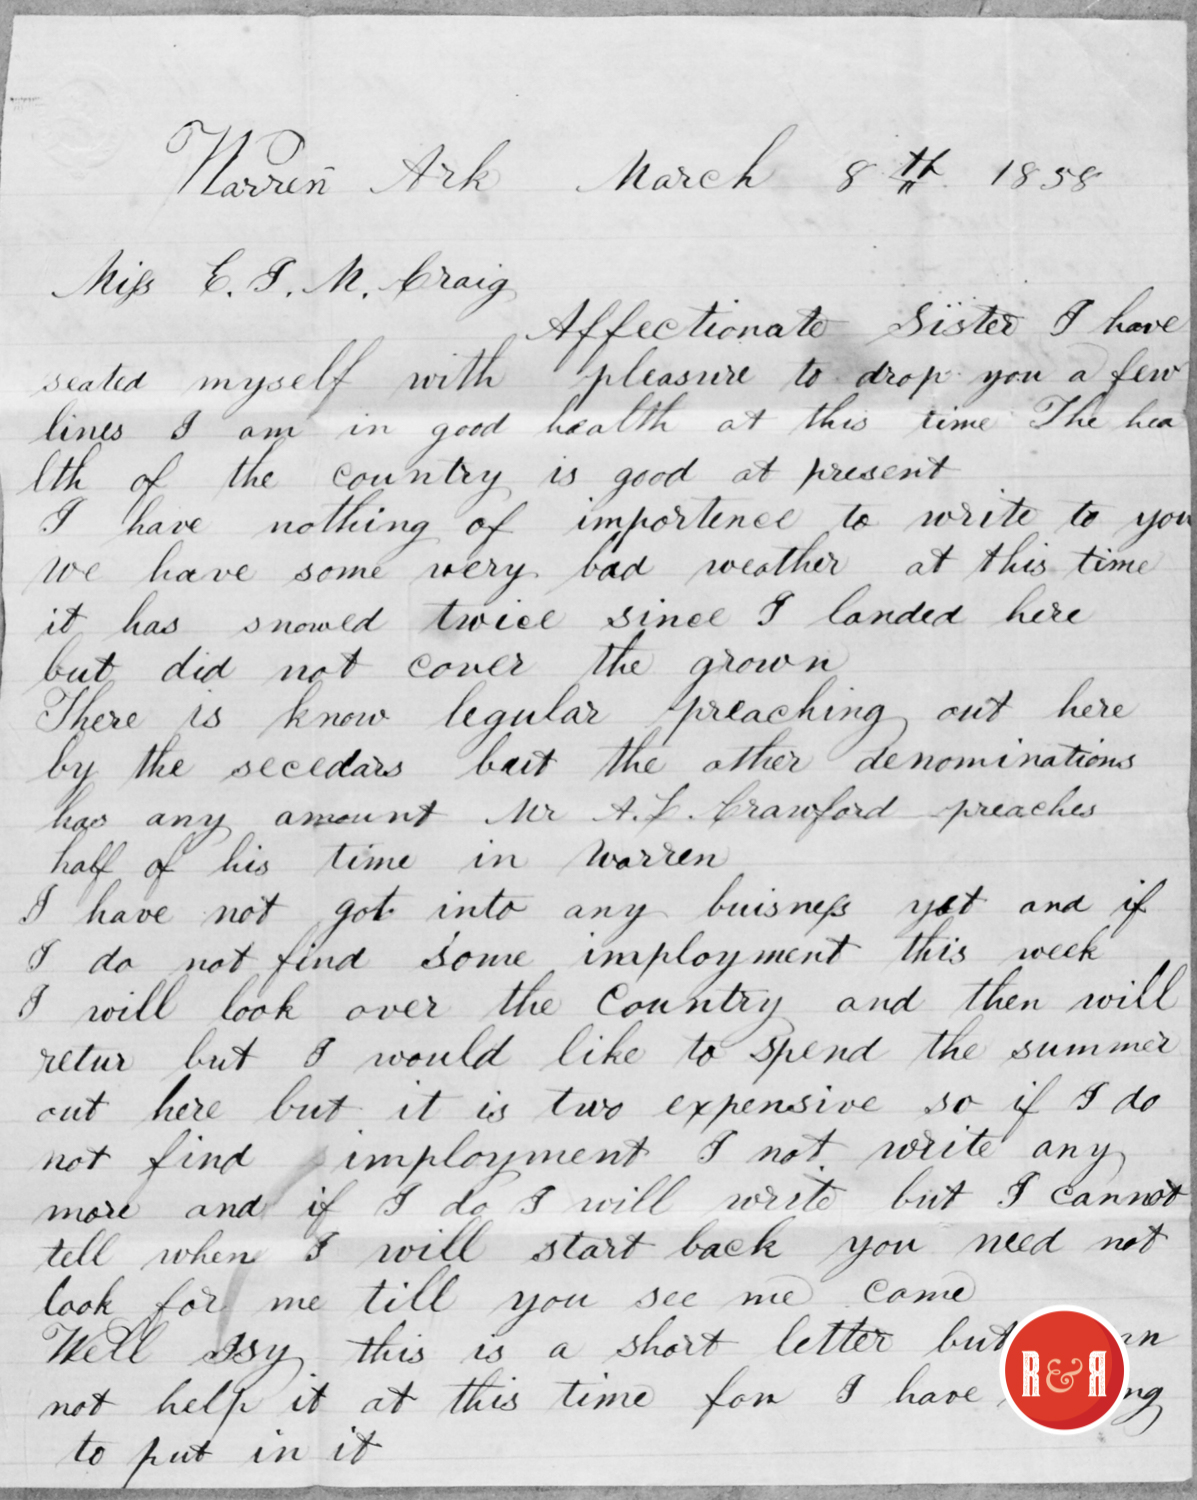 LETTER TO MS. CRAIG FROM WARREN, ARK., - 1858